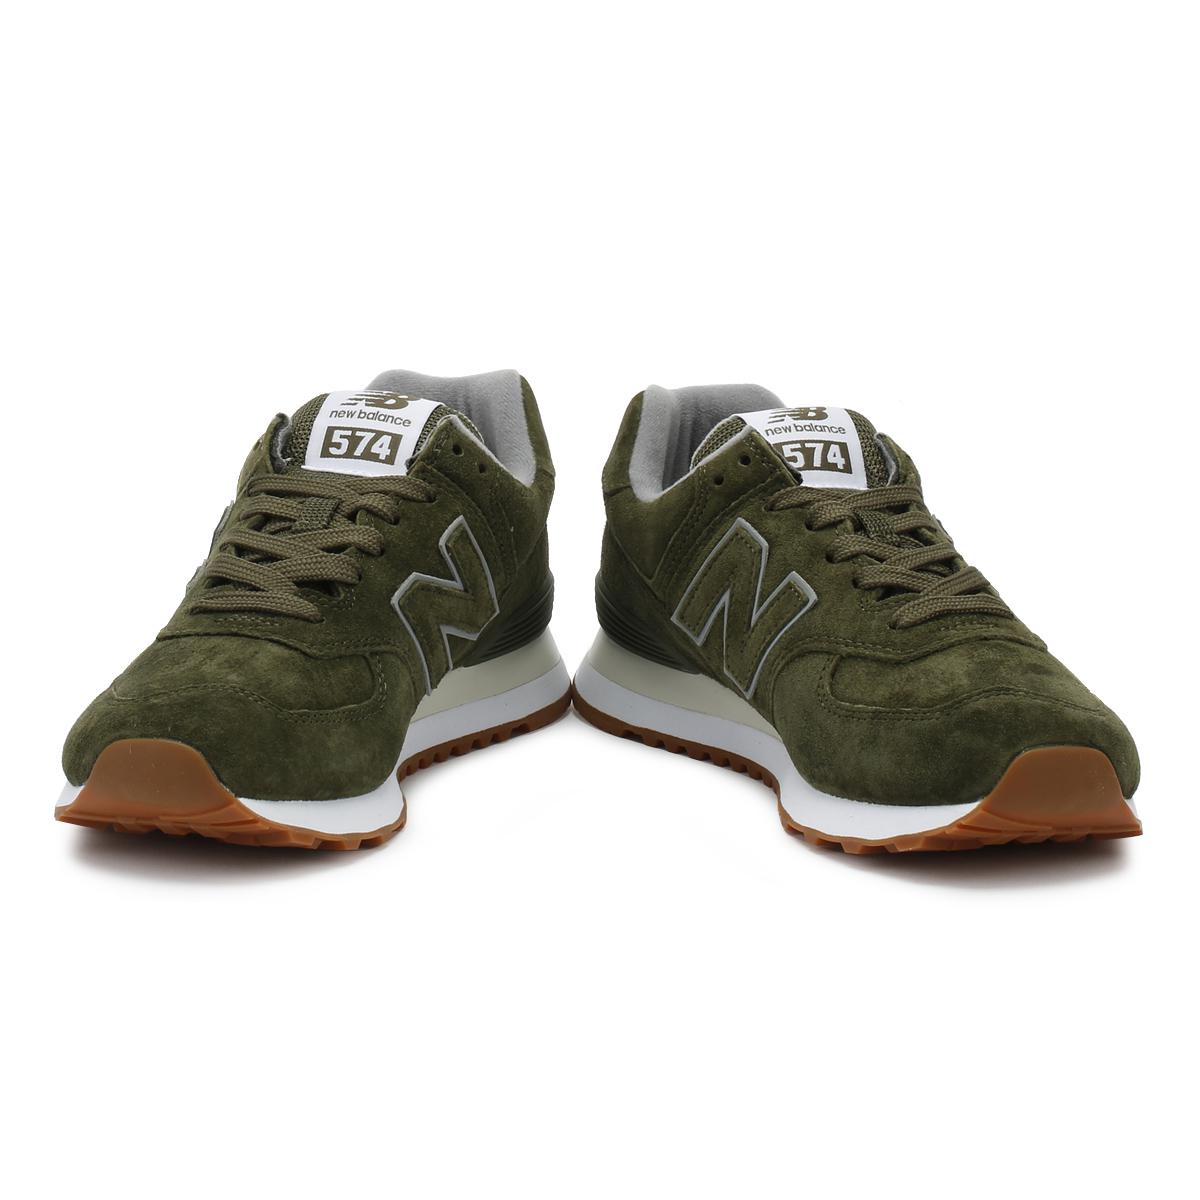 New Balance Suede Mens Dark Covert Green 574 Classic Trainers for Men - Lyst